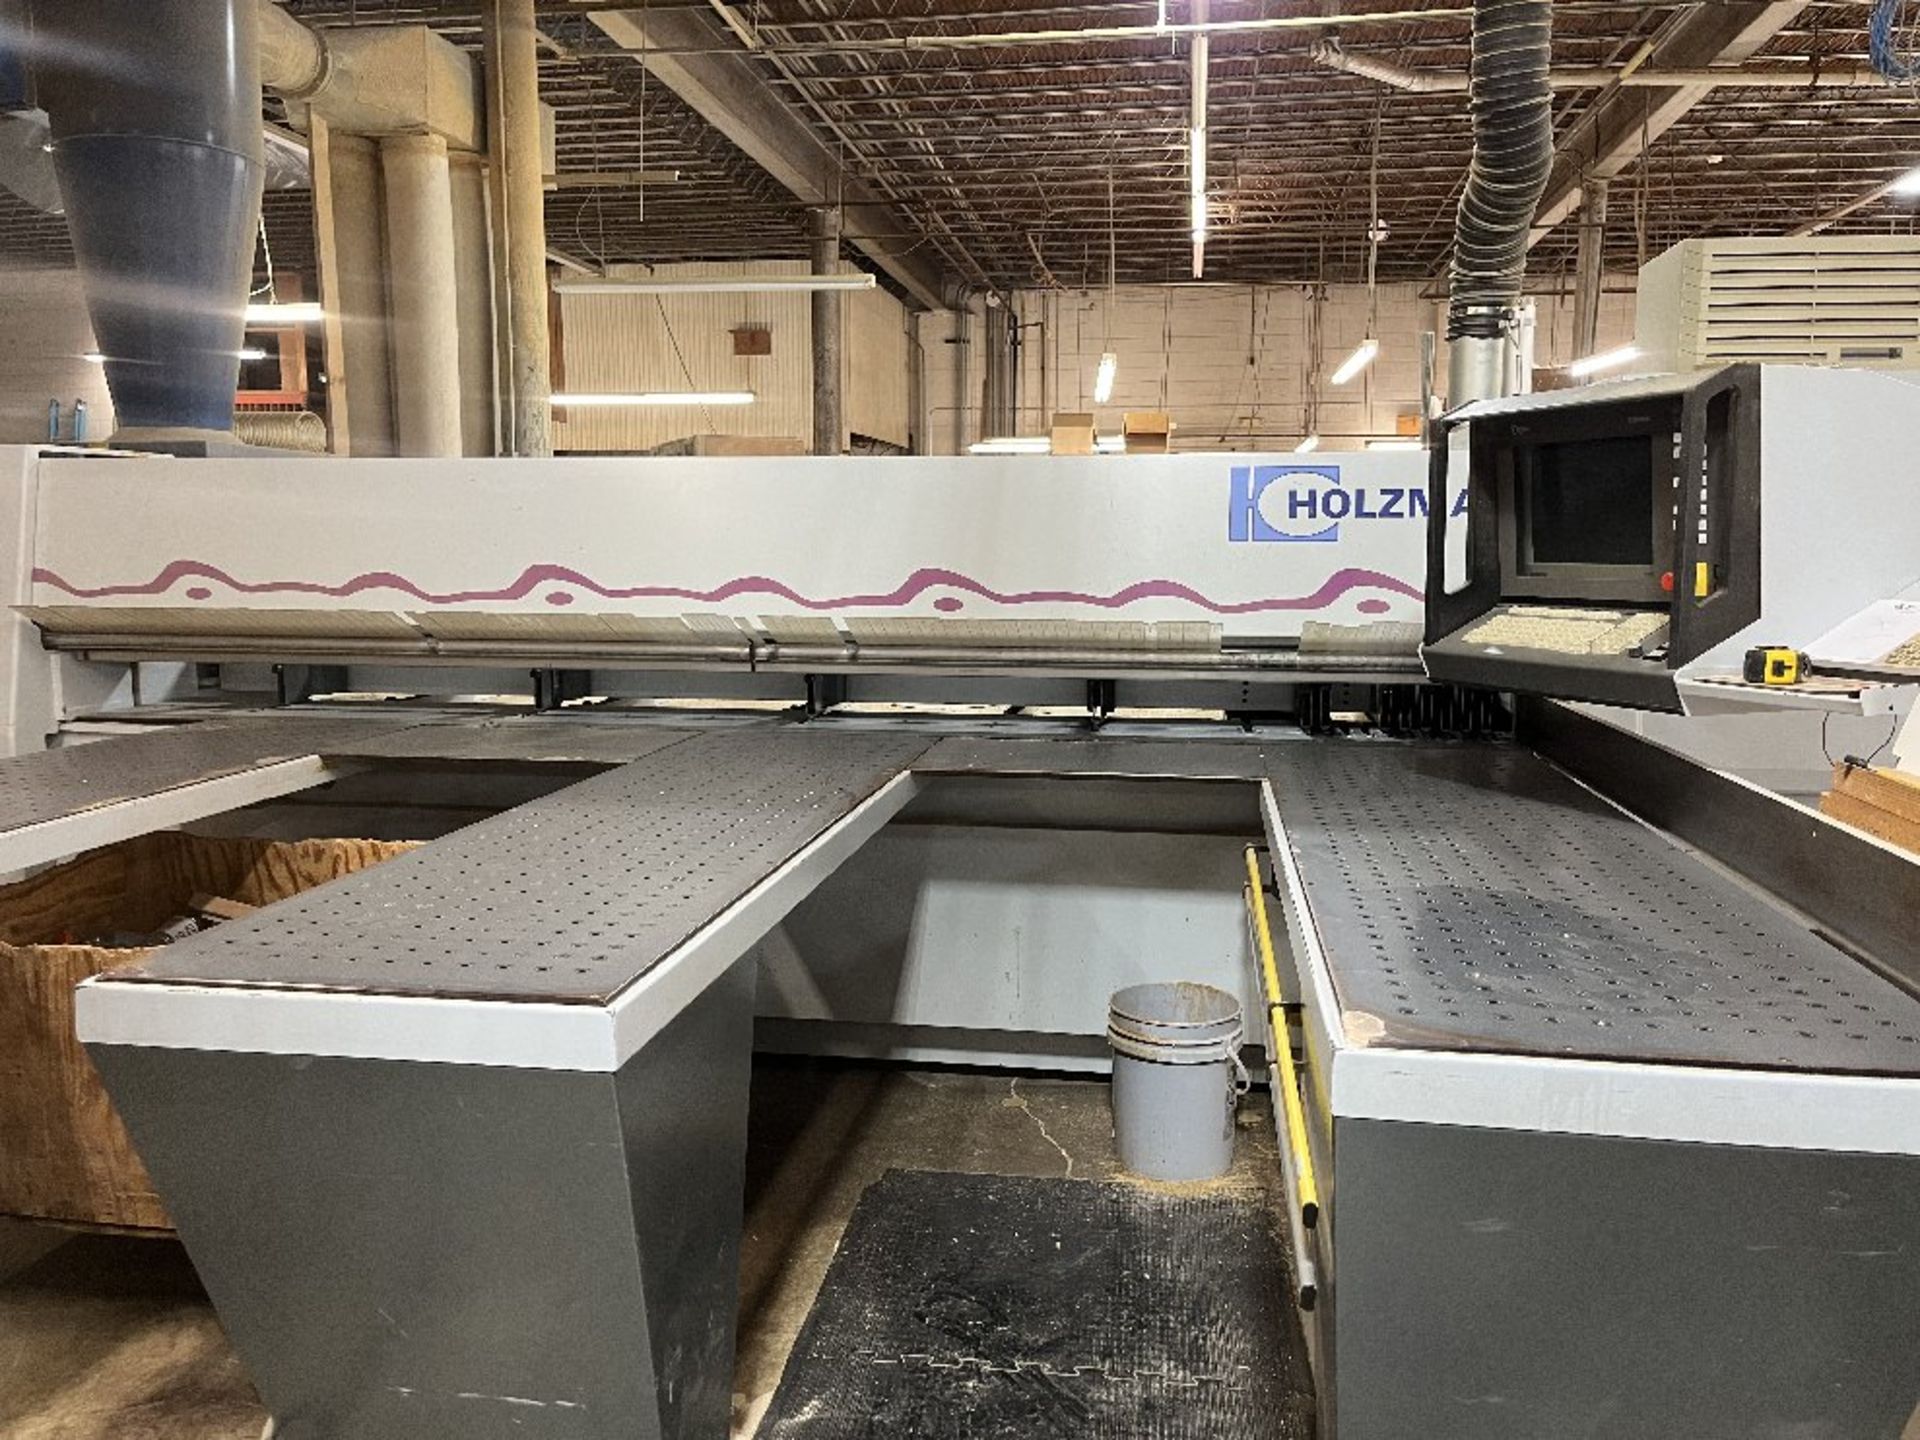 Holzma Panel Saw ModelHPP82 Optimat, S/N 0-240-15-2288, with 13' x 17' Table, Three 2' x 7' Air - Image 2 of 7